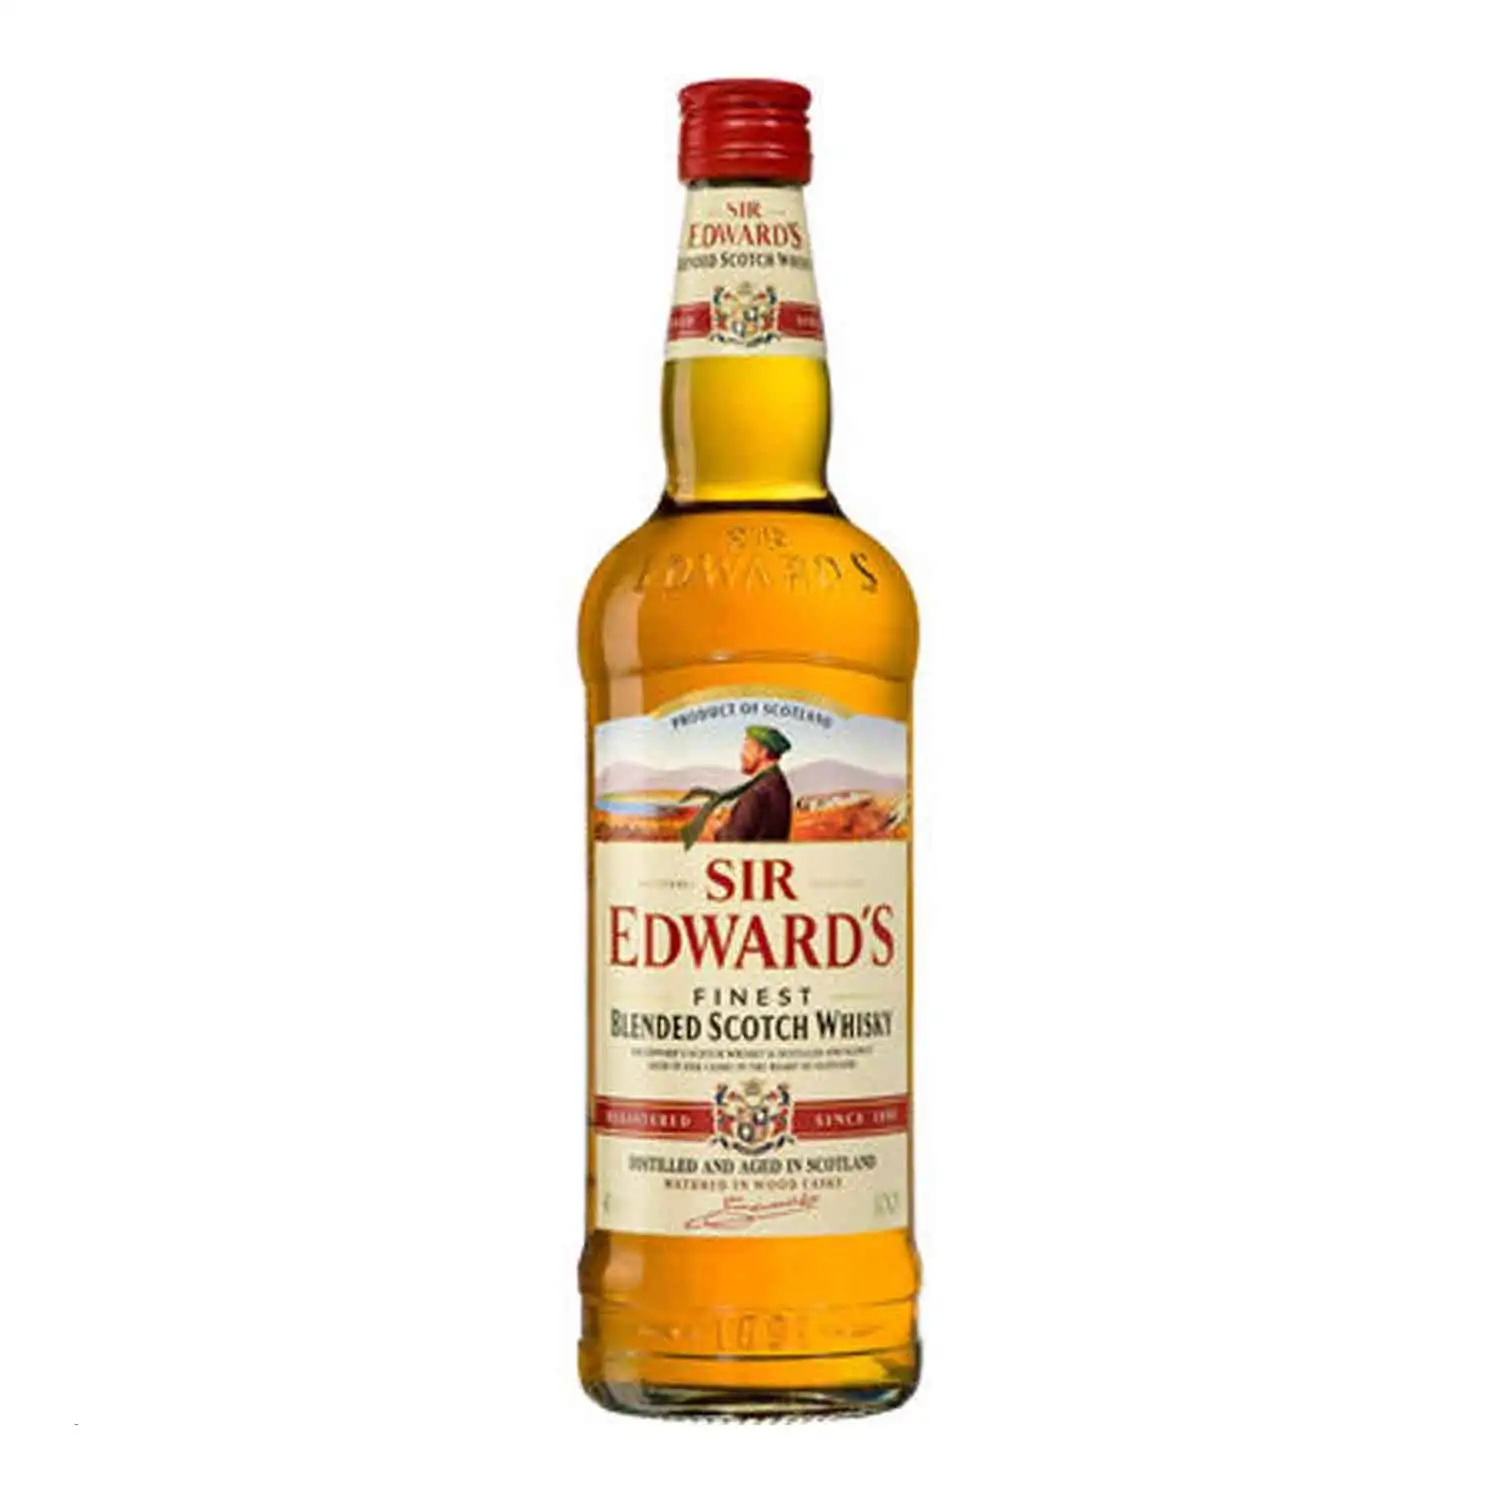 Sir Edward's finest 1l Alc 40% - Buy at Real Tobacco